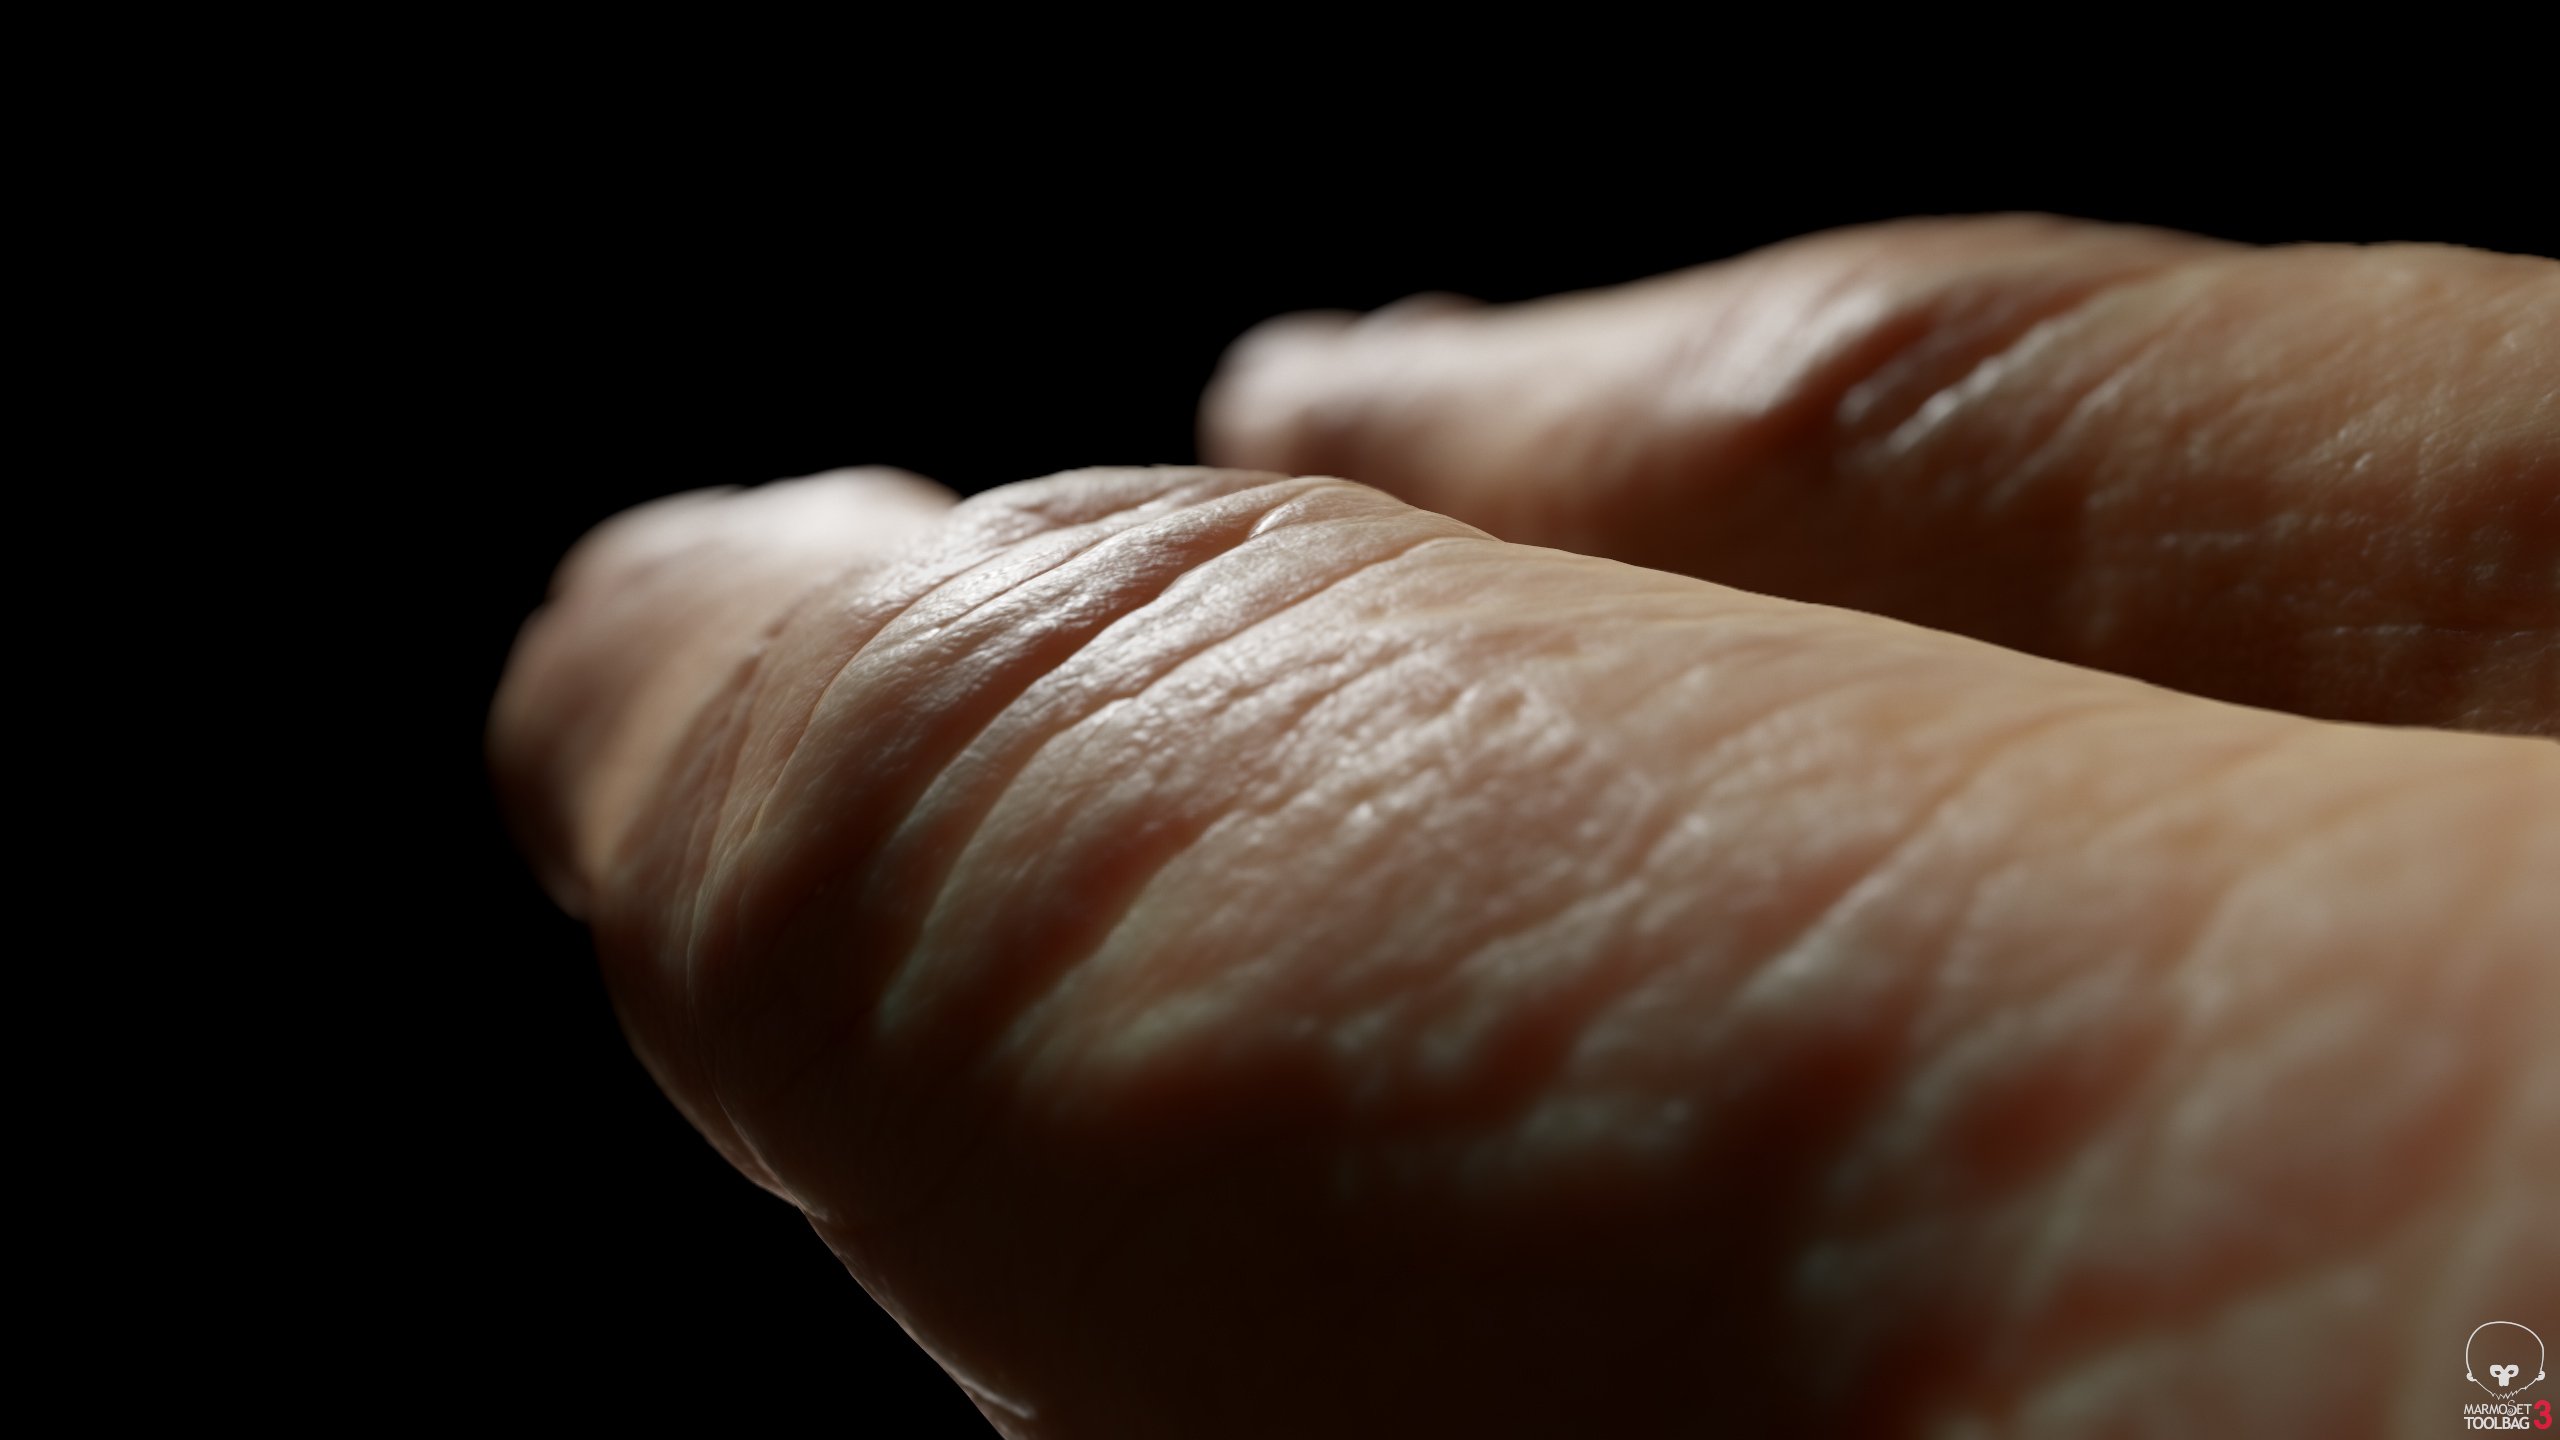 Download 3D Hand Models from scans